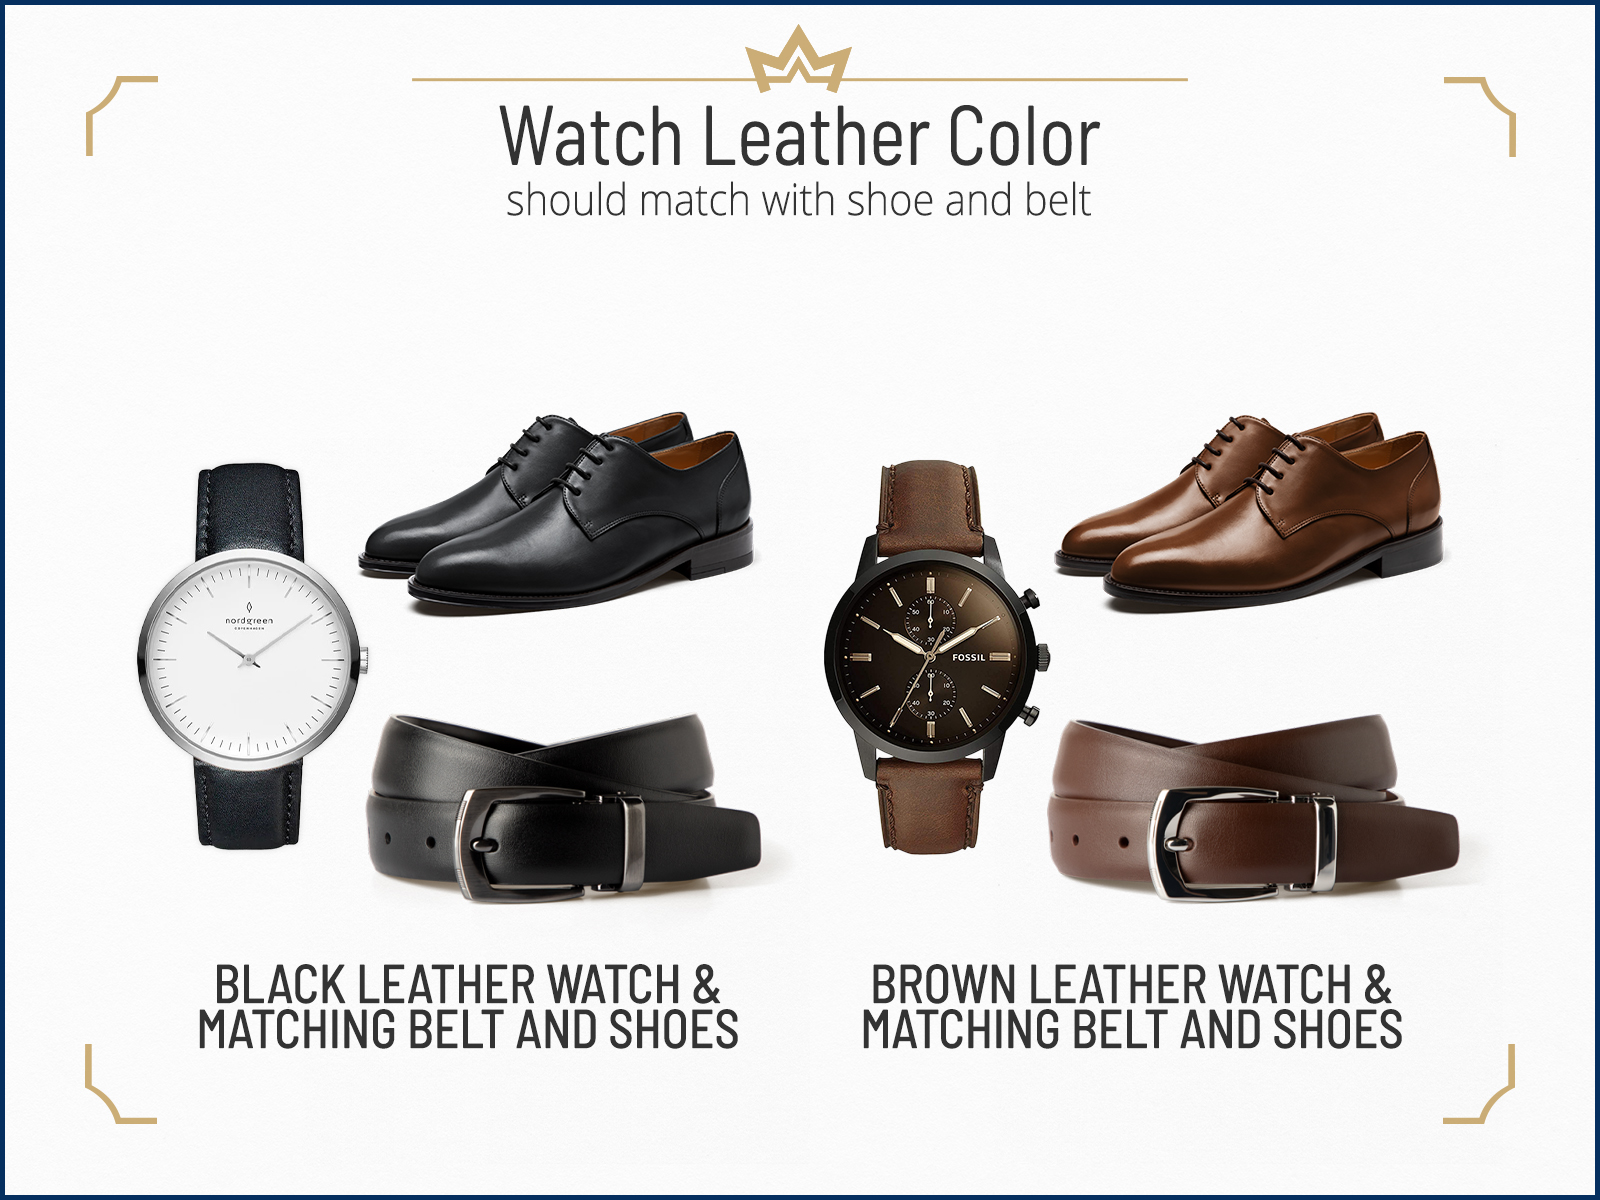 Watch leather color should match with the shoe and belt